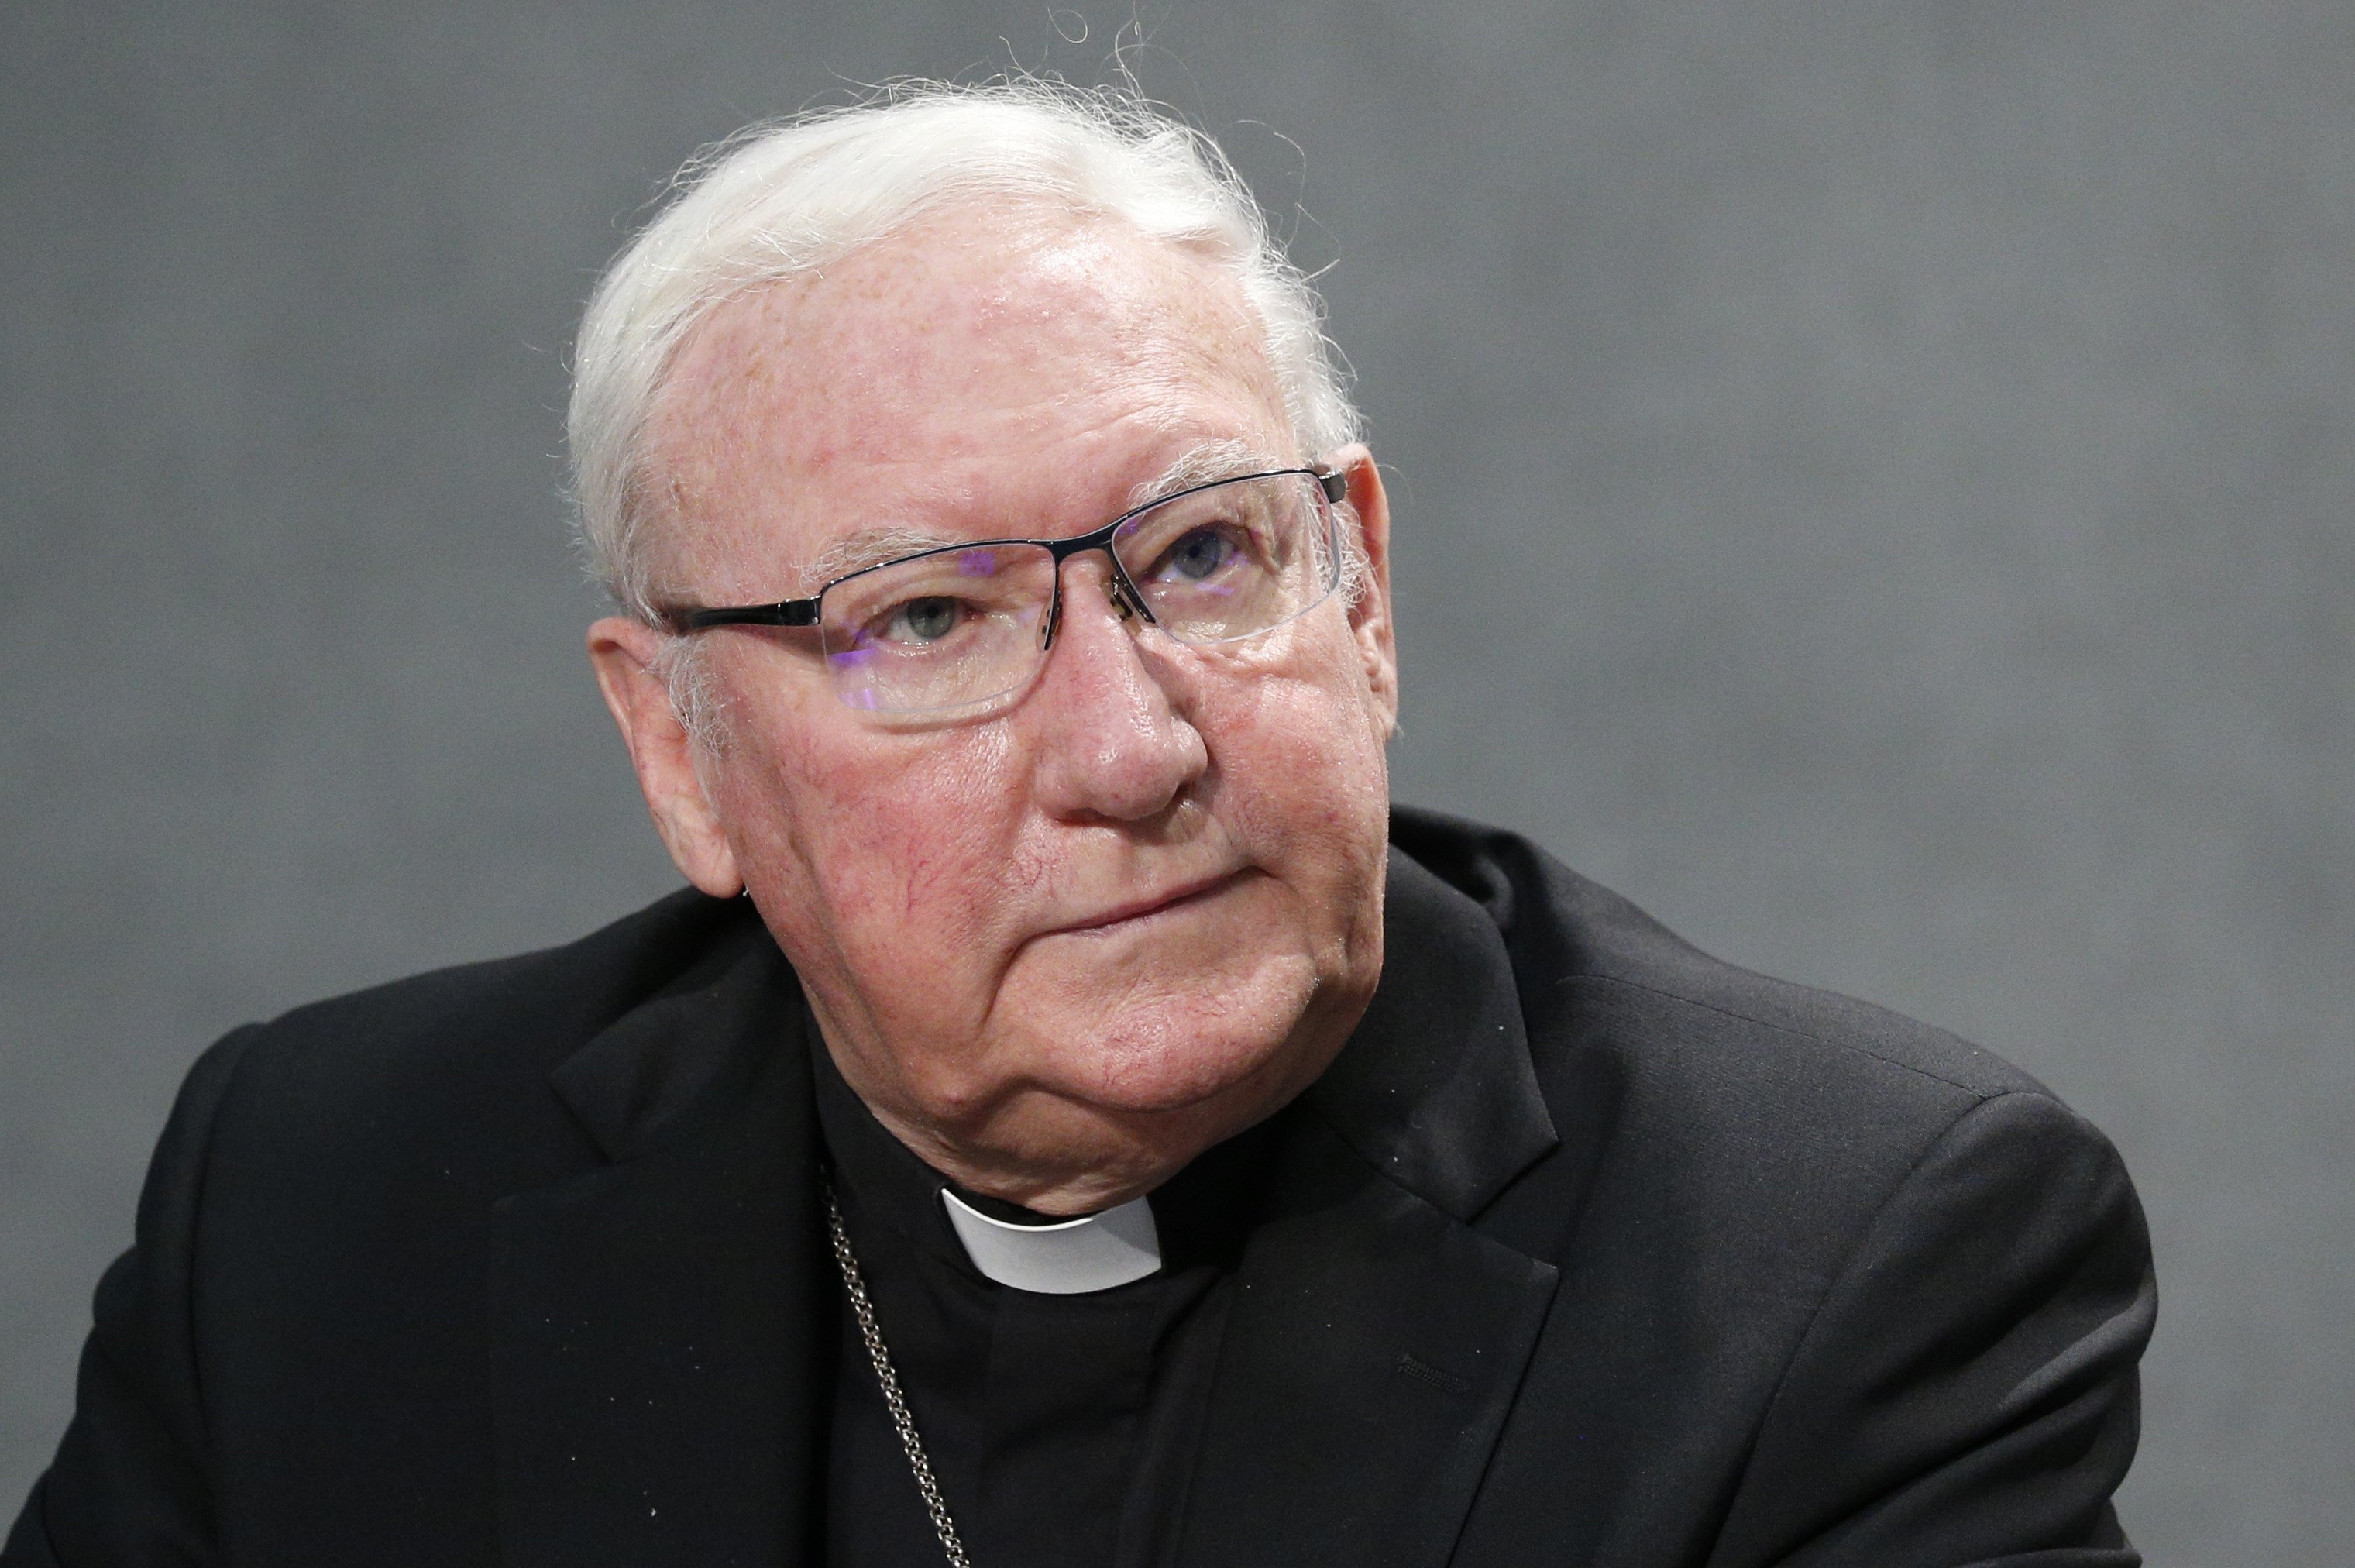 Bishop Brian Farrell, secretary of the Pontifical Council for Promoting Christian Unity, attends a news conference at the Vatican in this June 25, 2021, file photo. (CNS photo/Paul Haring)